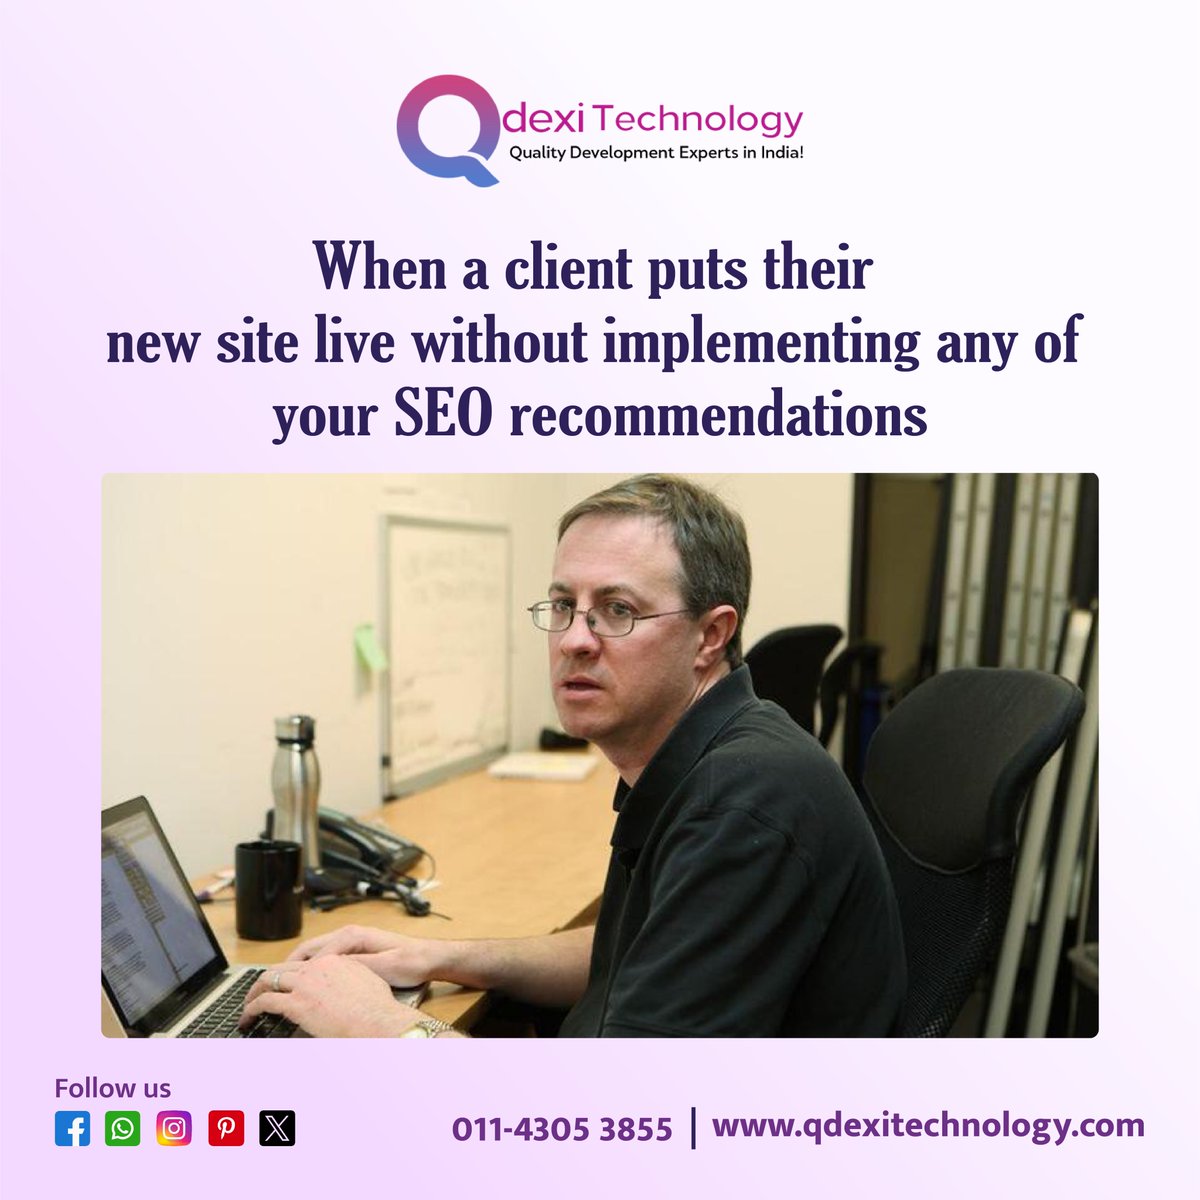 Quality Development Experts in India: Clients are developing websites without following important SEO tips. Qdexi Technology offers quality solutions with an innovative approach. 

#QualityDevelopmentIndia #SEOExperts #ClientSiteLaunch #IndiaWebDevelopment